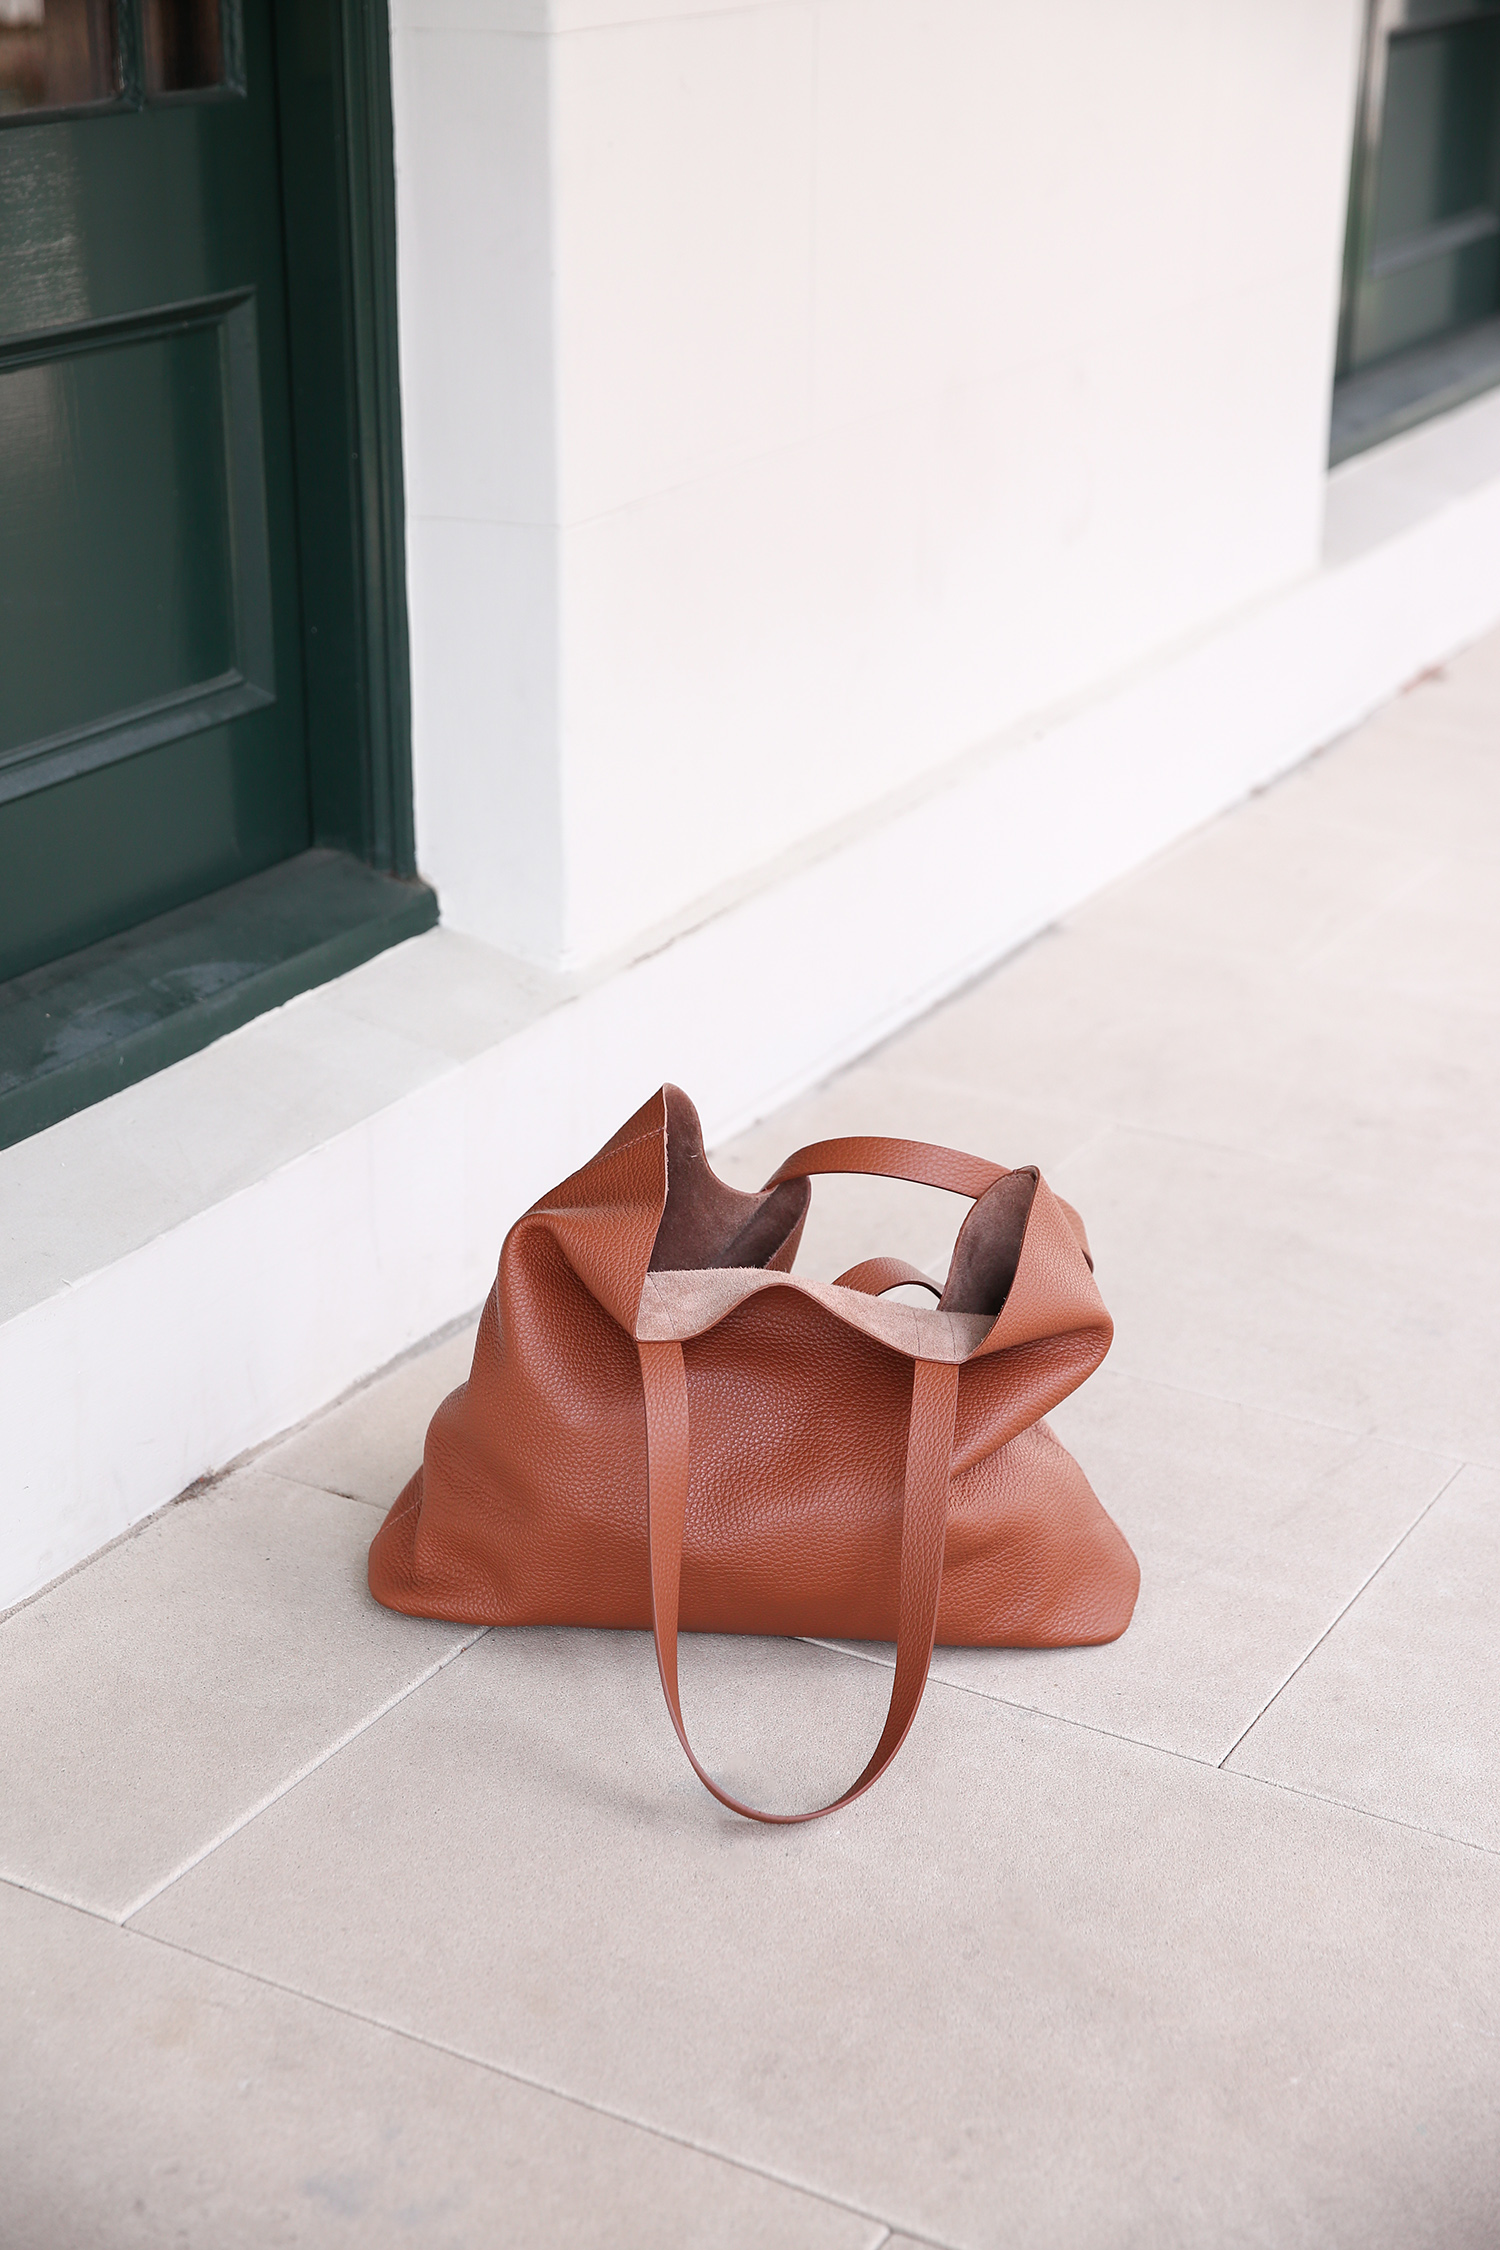 Everlane Soft Day Tote Review